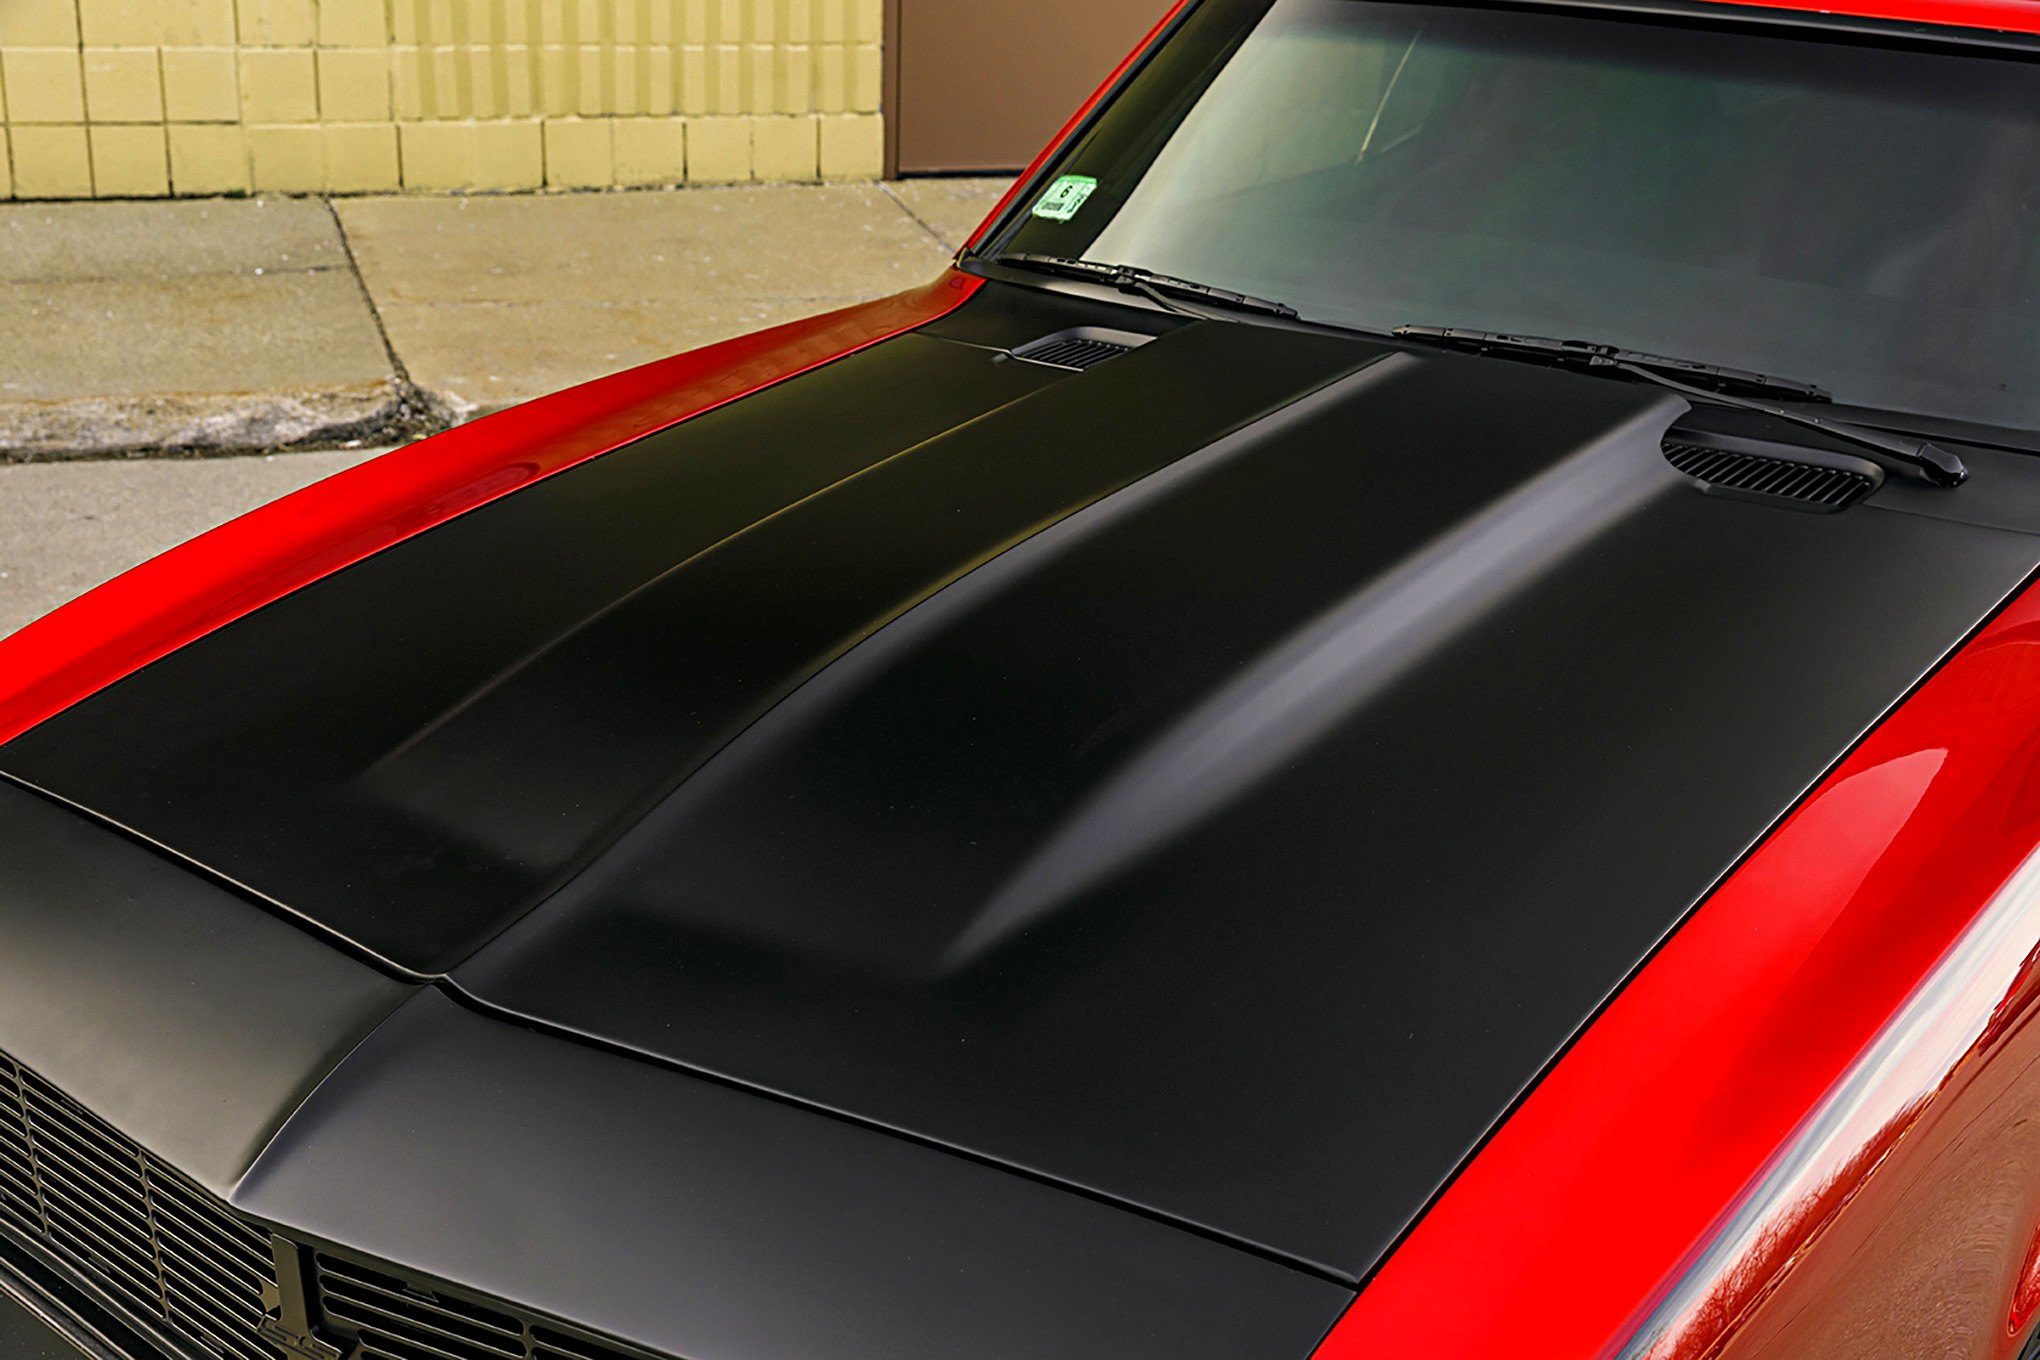 Aftermarket Vented Hood on Red Chevy Camaro SS - Photo by Robert McGaffin